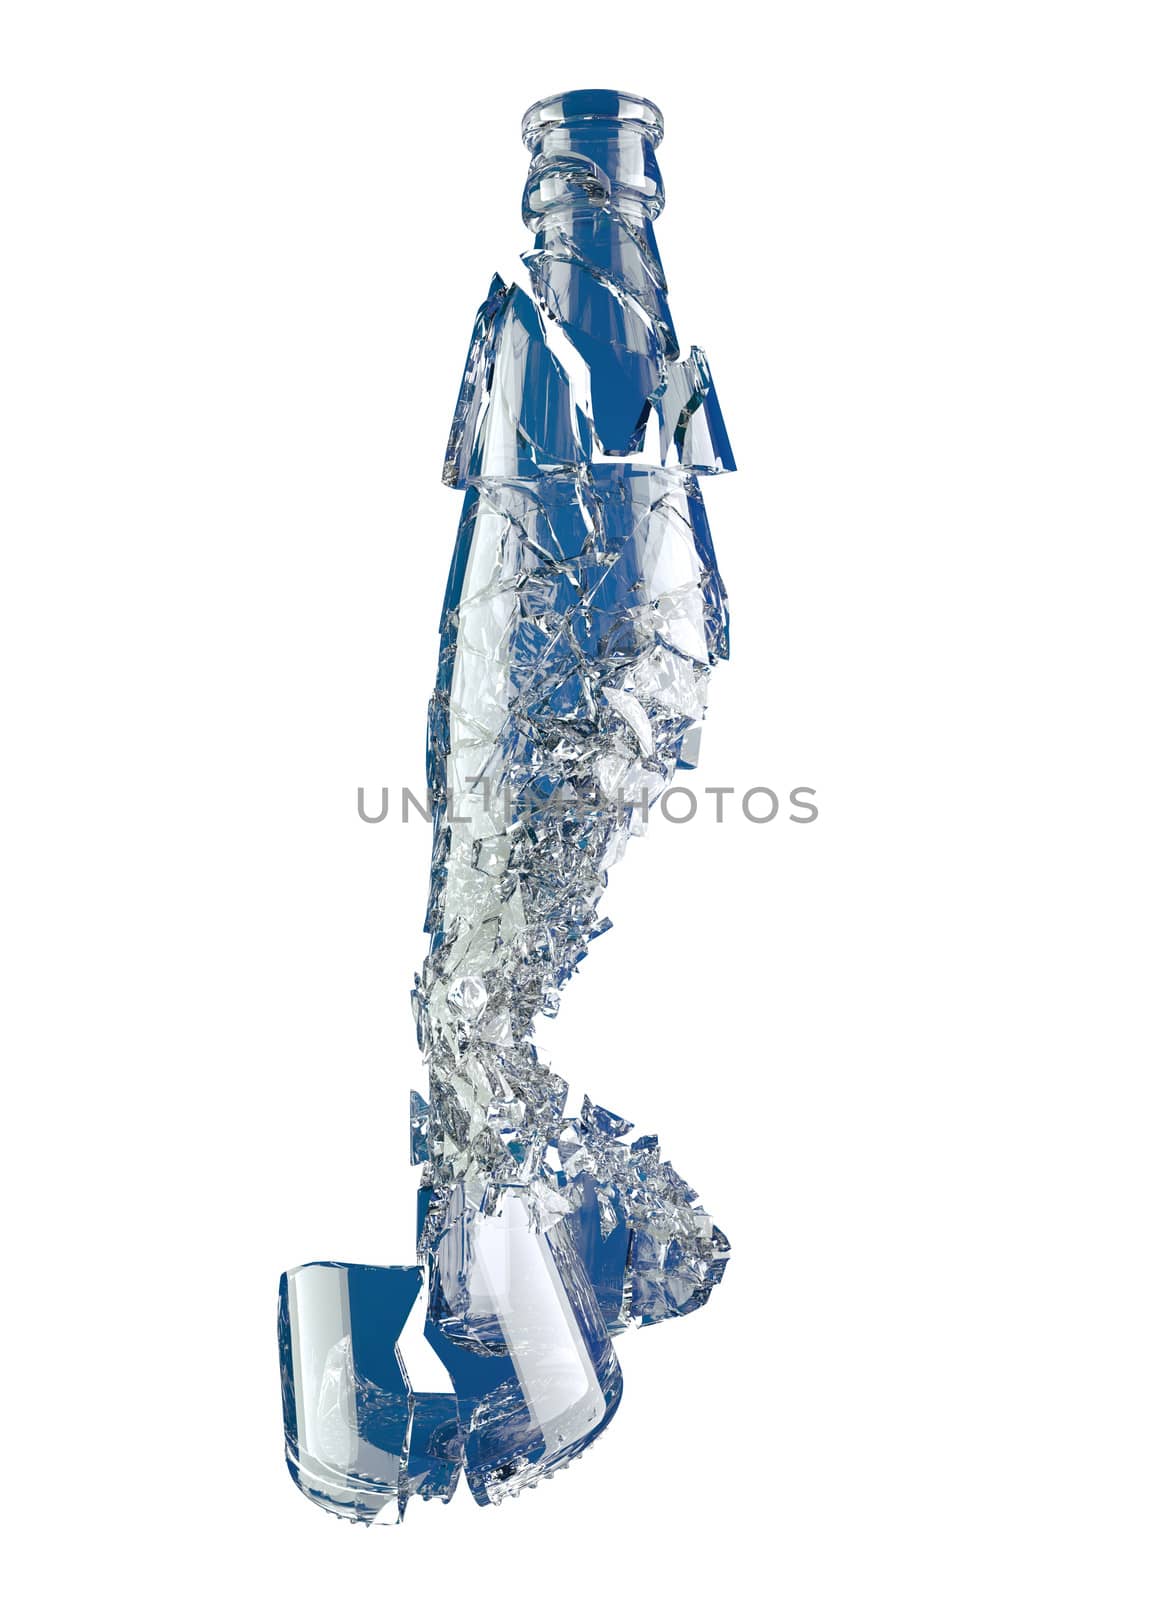 Smashed glass bottle in peices isolated on white